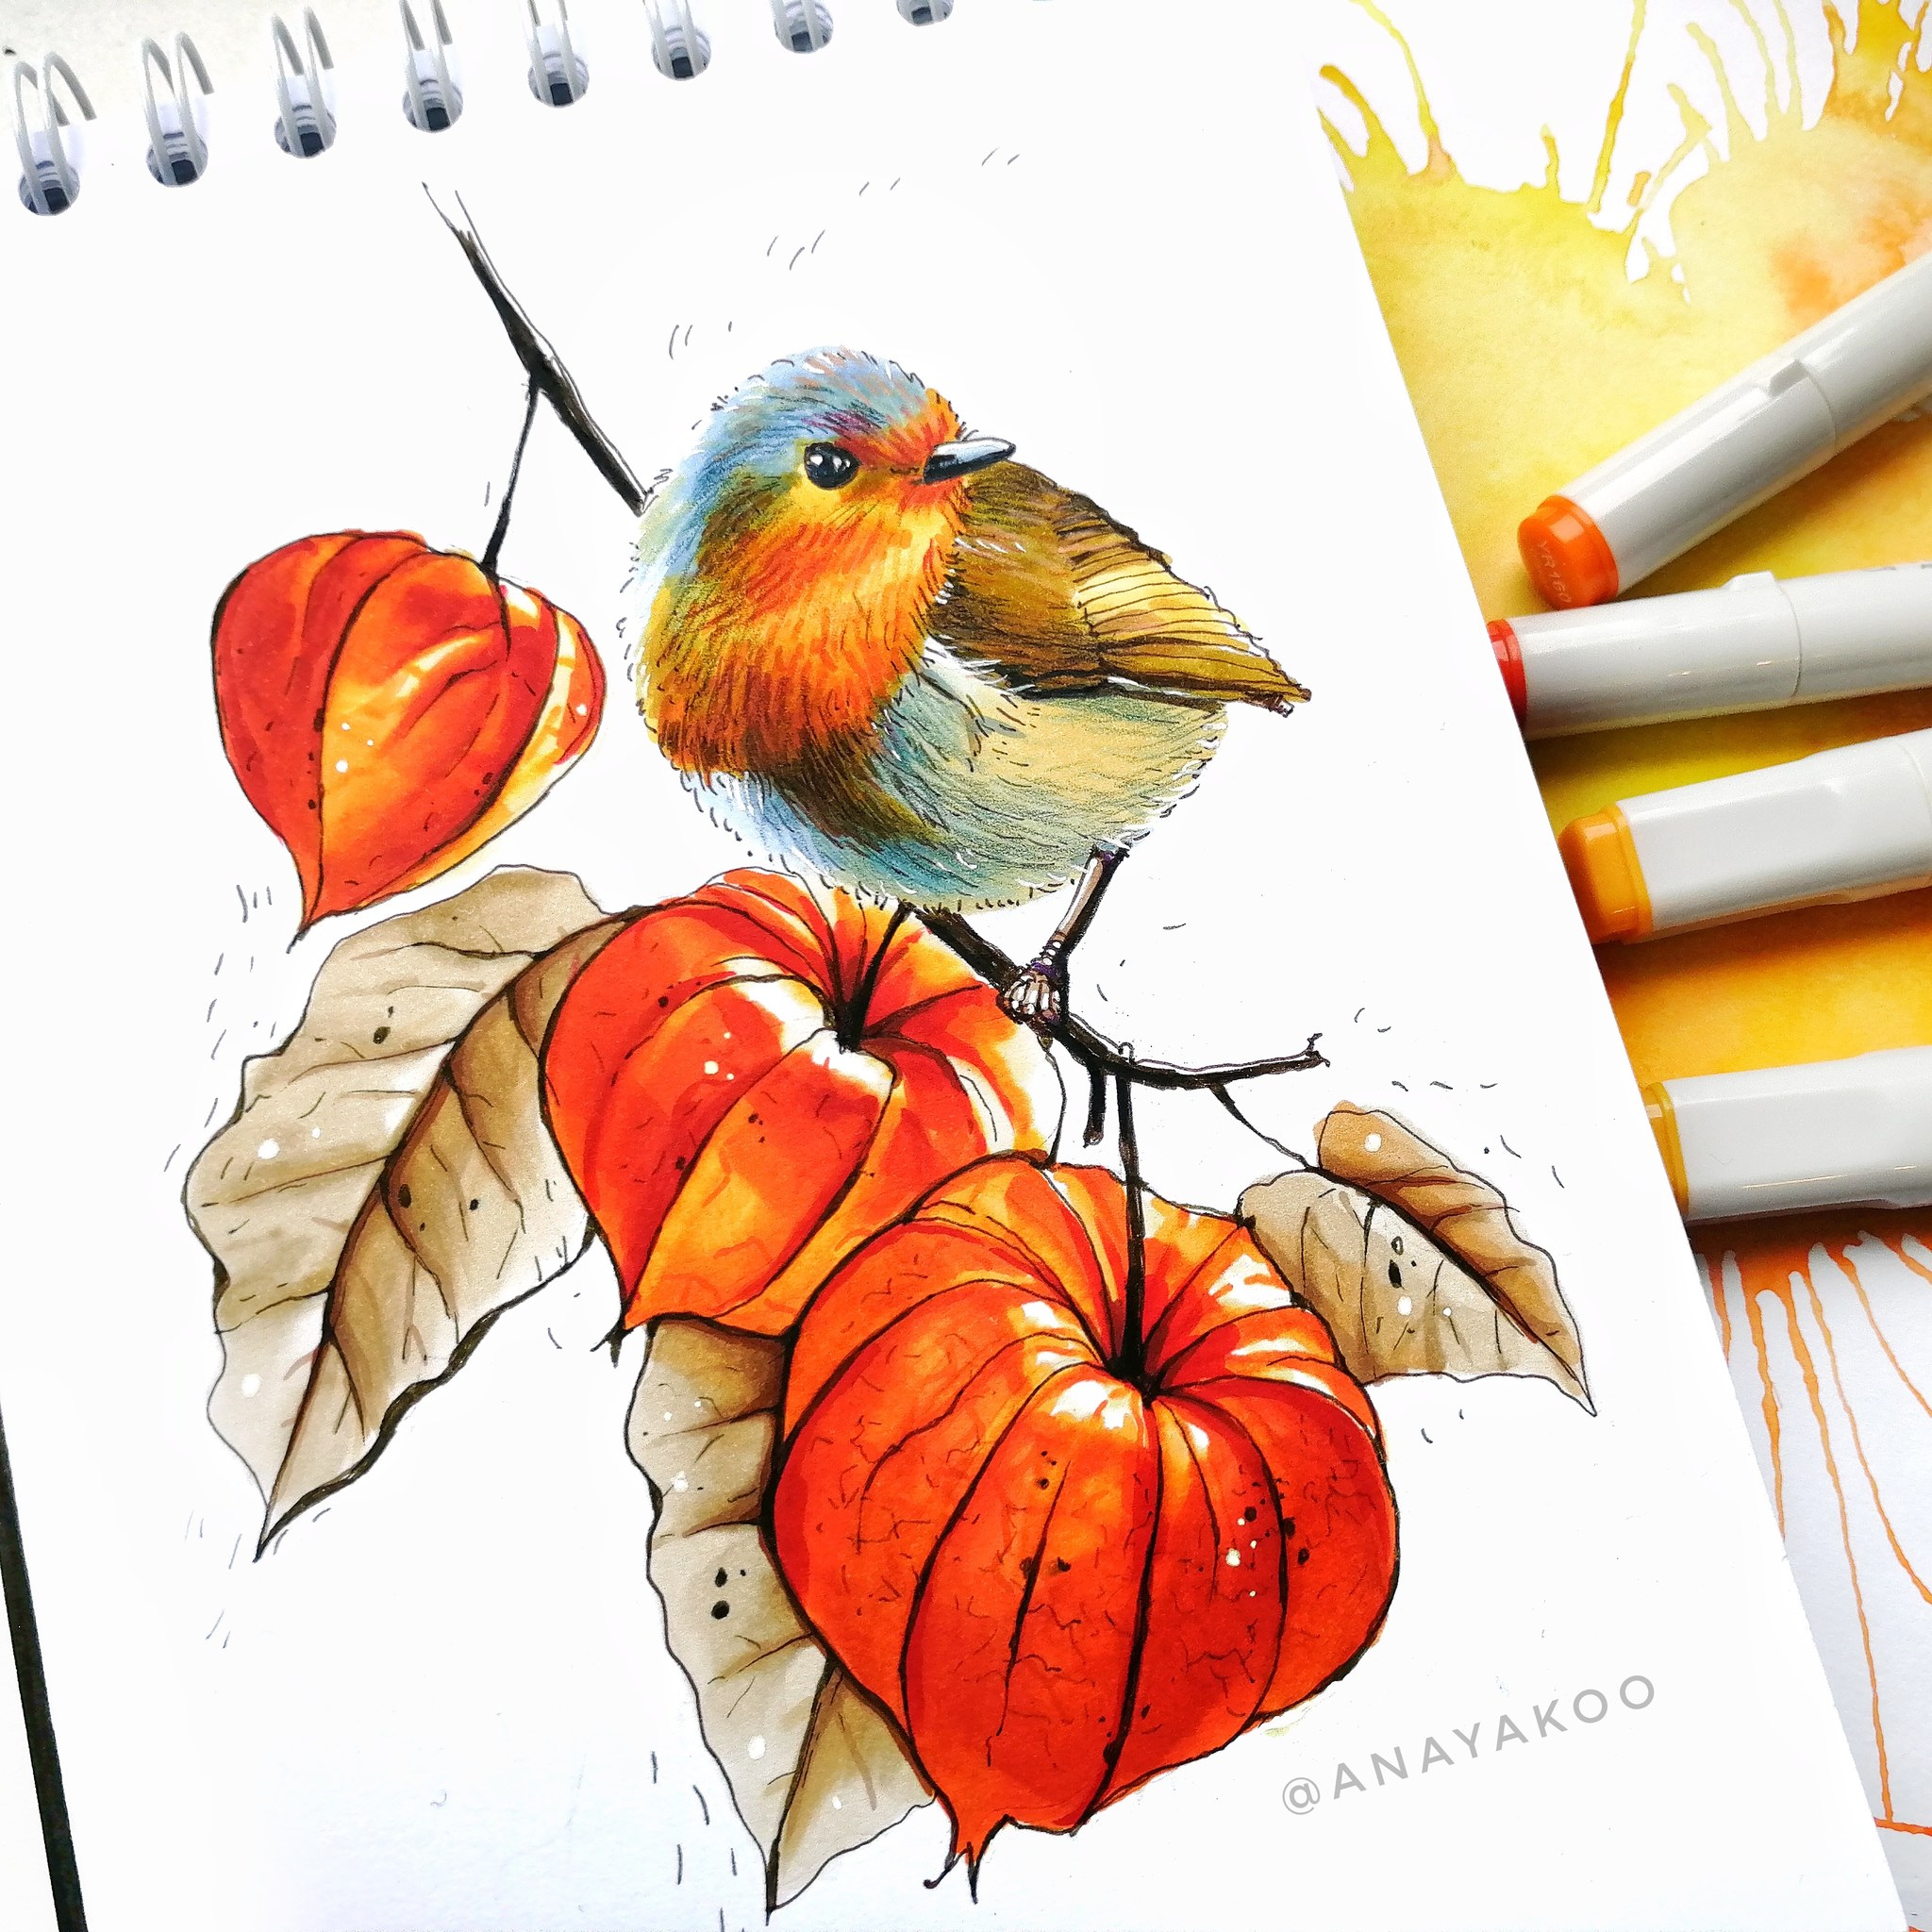 Physalis - My, Physalis, Robin, Alcohol markers, Liner, Sketch, Drawing, Sketchbook, Art